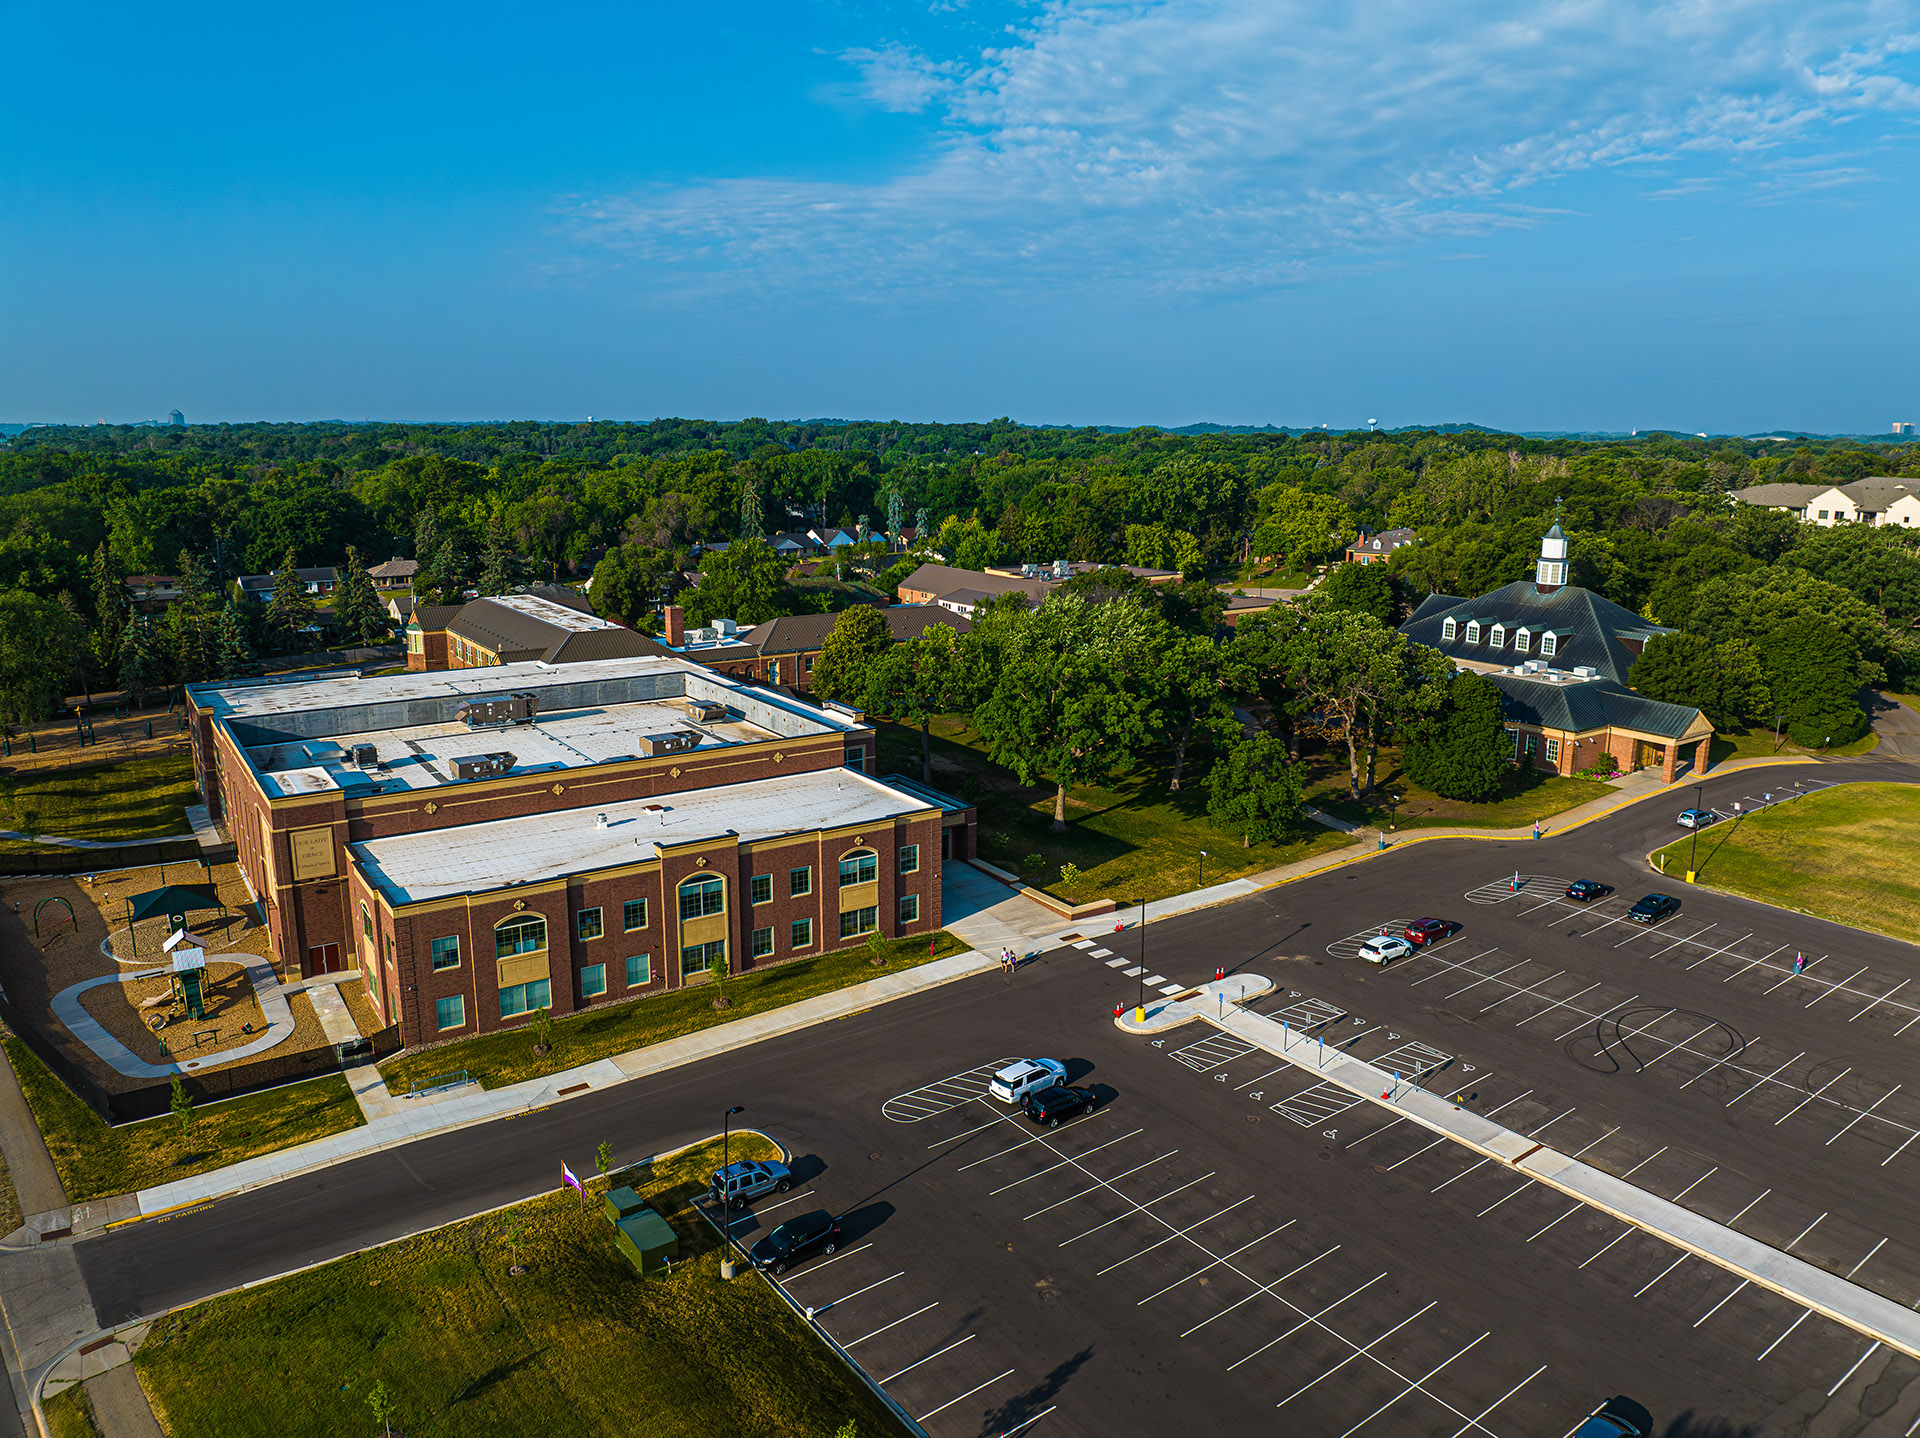 Drone image showing a large shared parking lot between a school and church